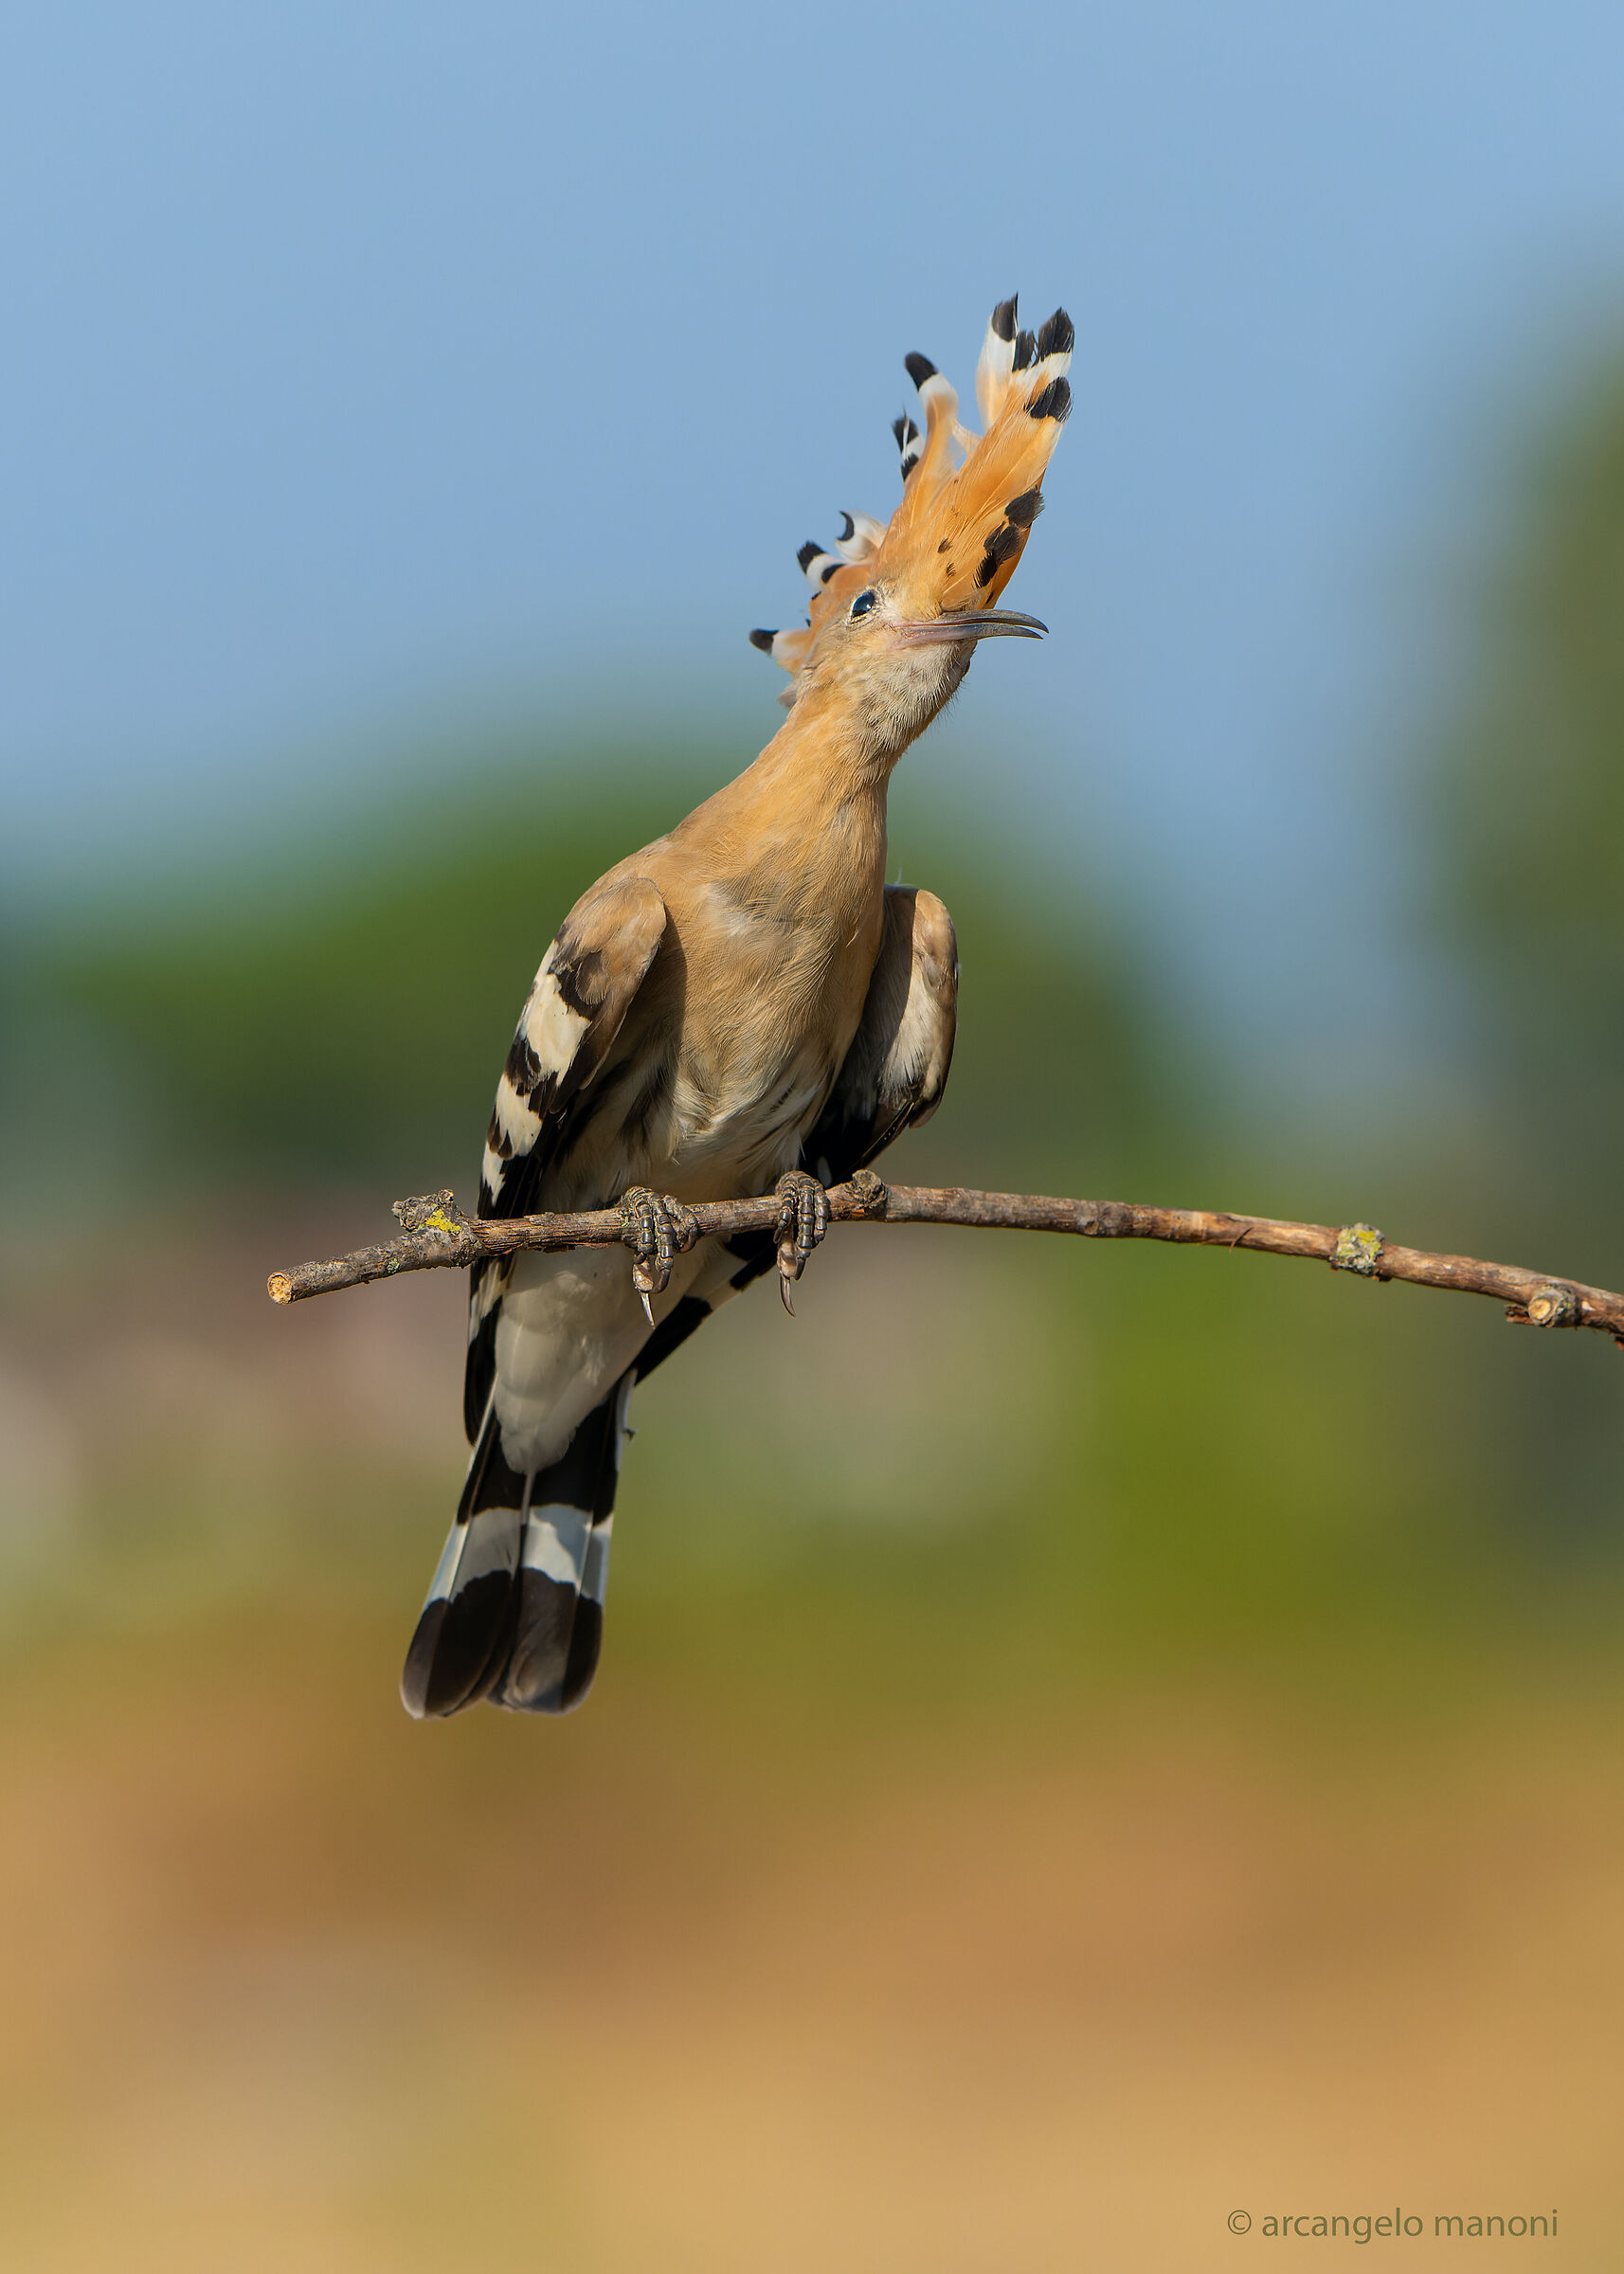 The smile of the hoopoe...